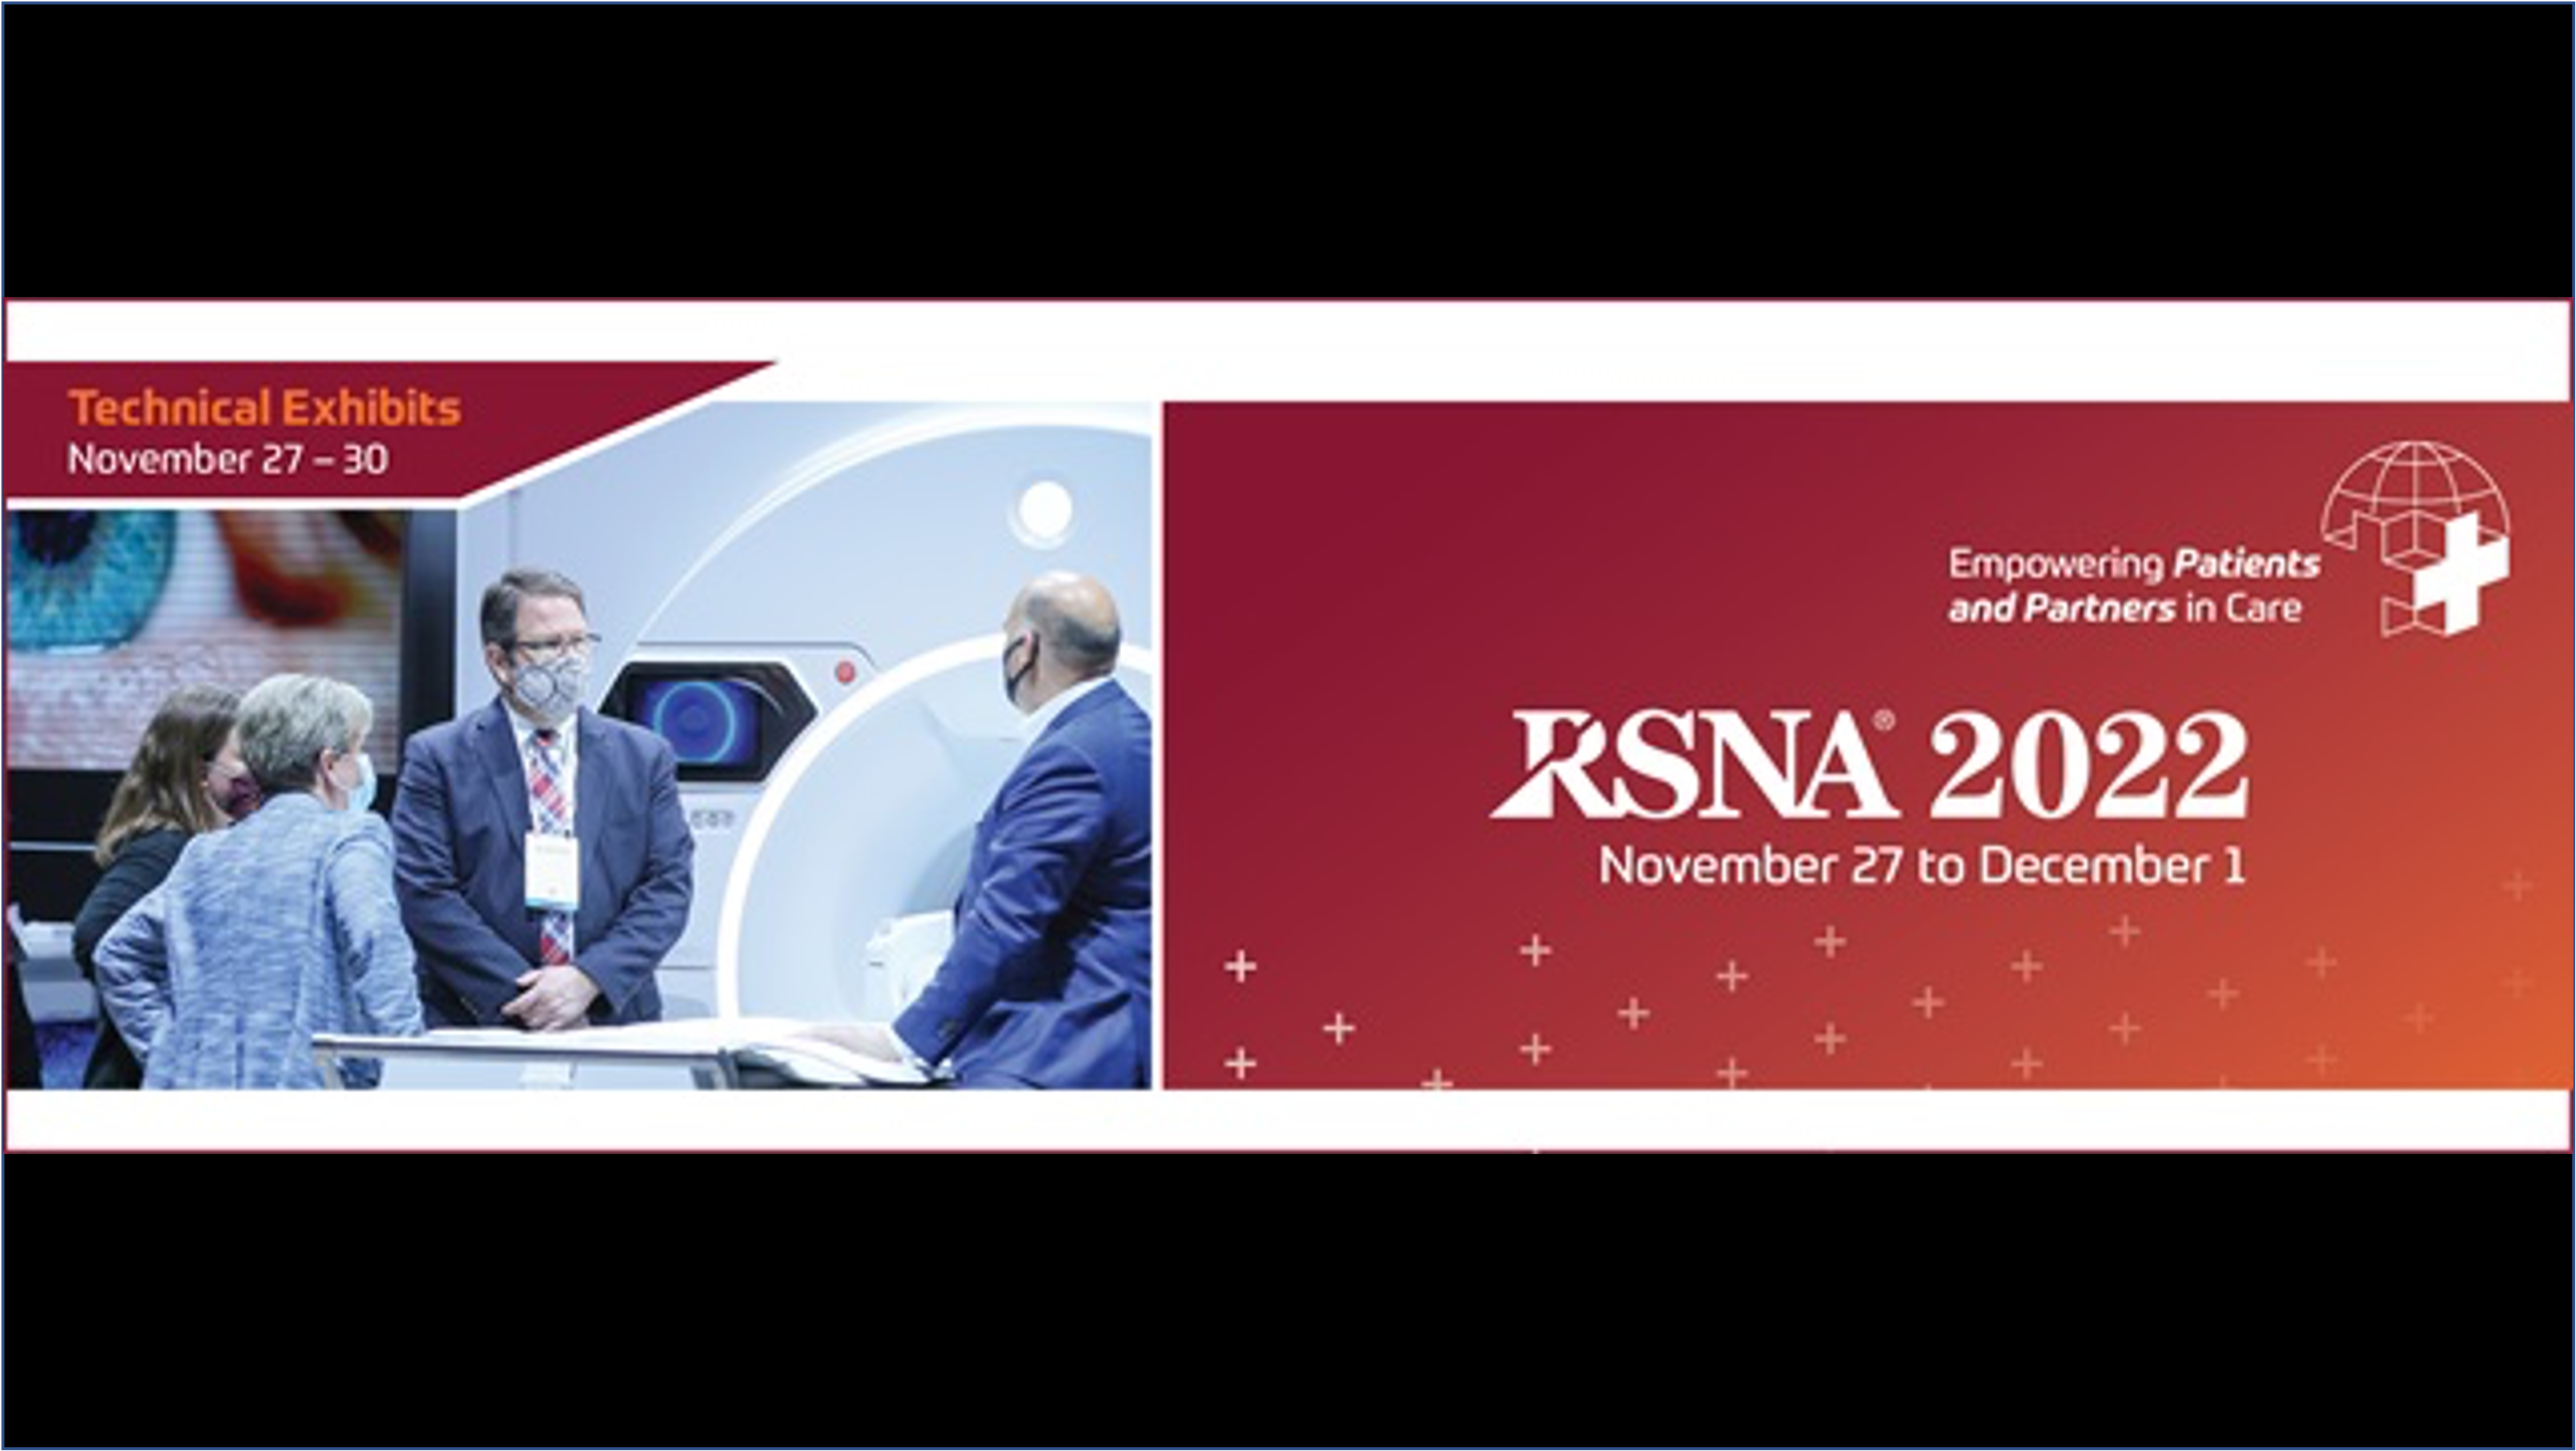 September 2022: Be Our Guest at RSNA 2022!